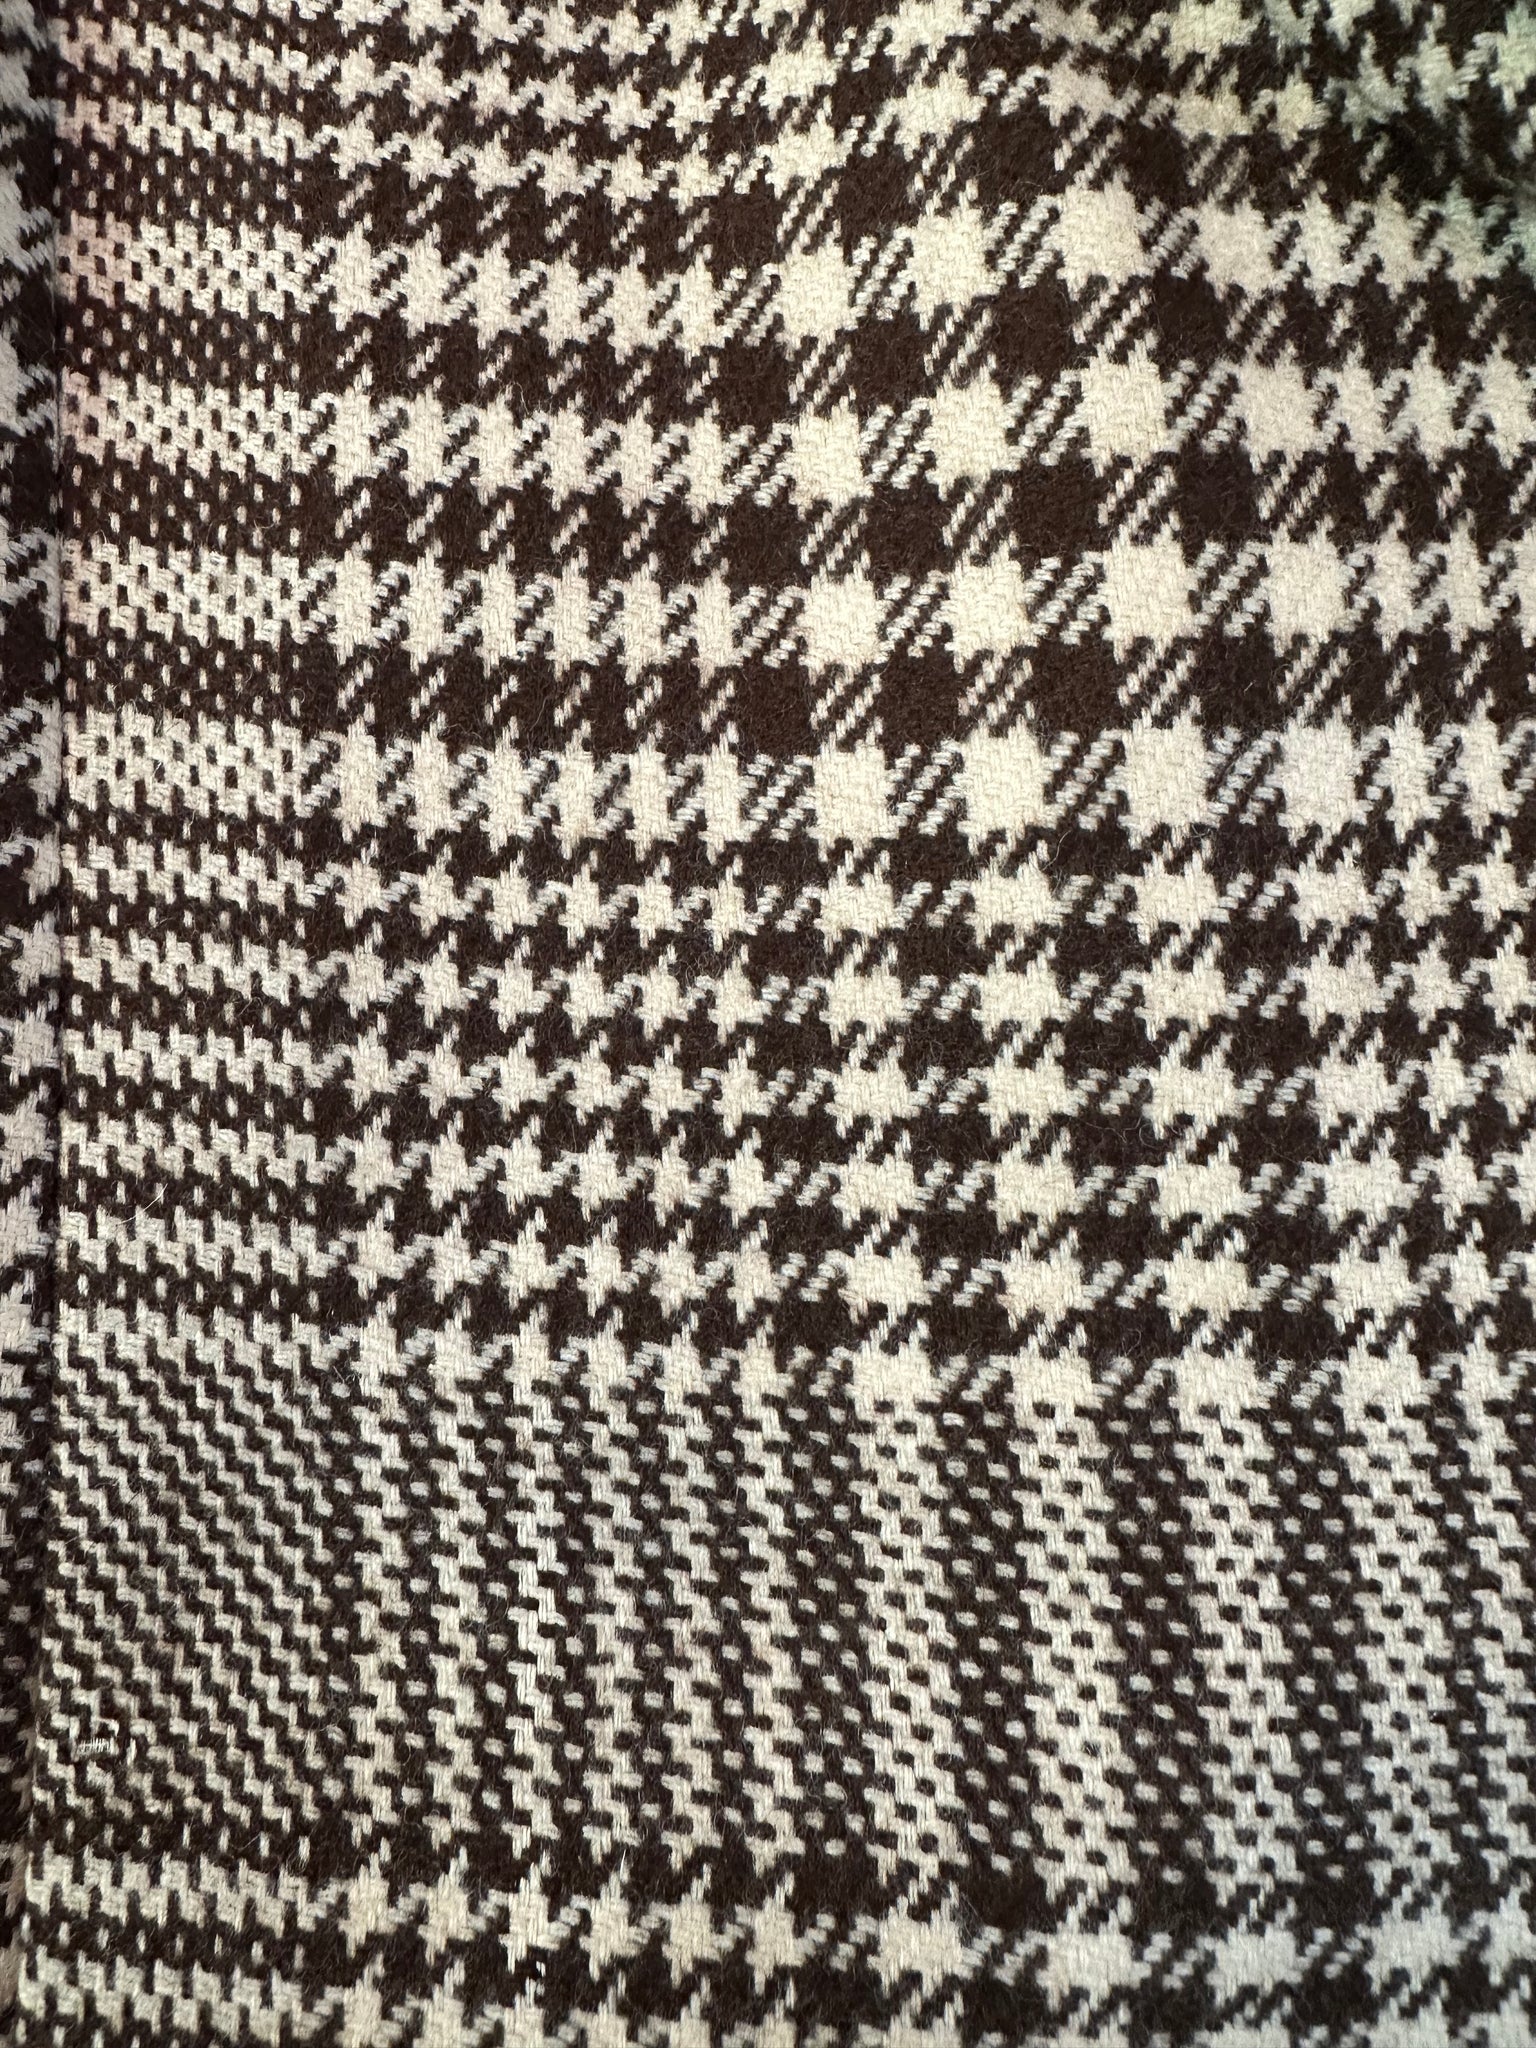   Valentino Brown and Ivory Houndstooth Wool Dress Coat with Velvet Trim DETAIL 5 of 6